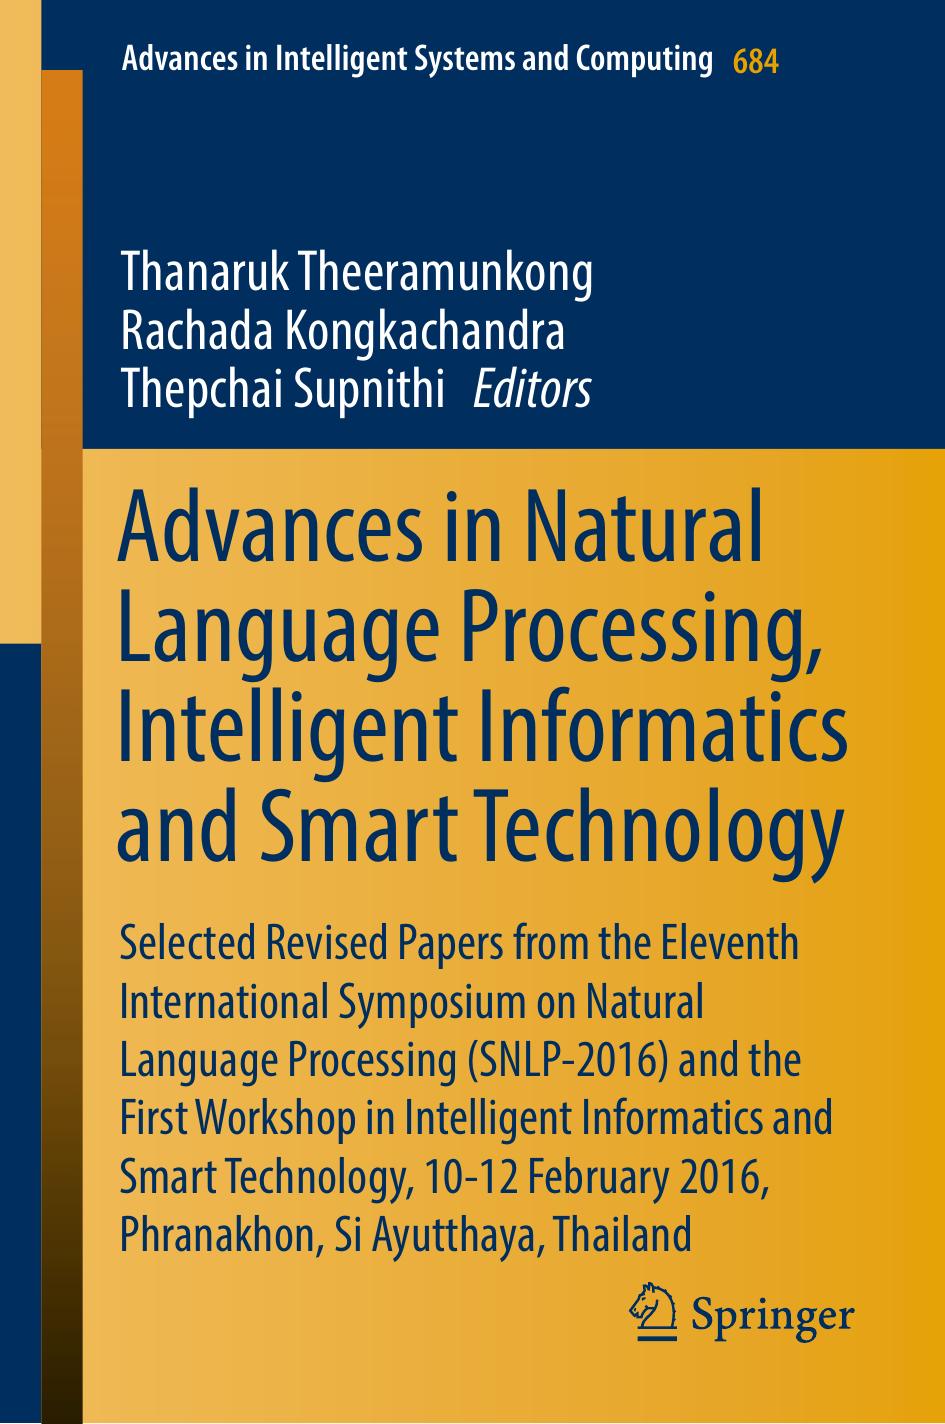 Advances in Natural Language Processing, Intelligent Informatics and Smart Technology : Selected Revised Papers from the Eleventh International Symposium on Natural Language Processing (SNLP-2016) and the First Workshop in Intelligent Informatics and Smart Technology